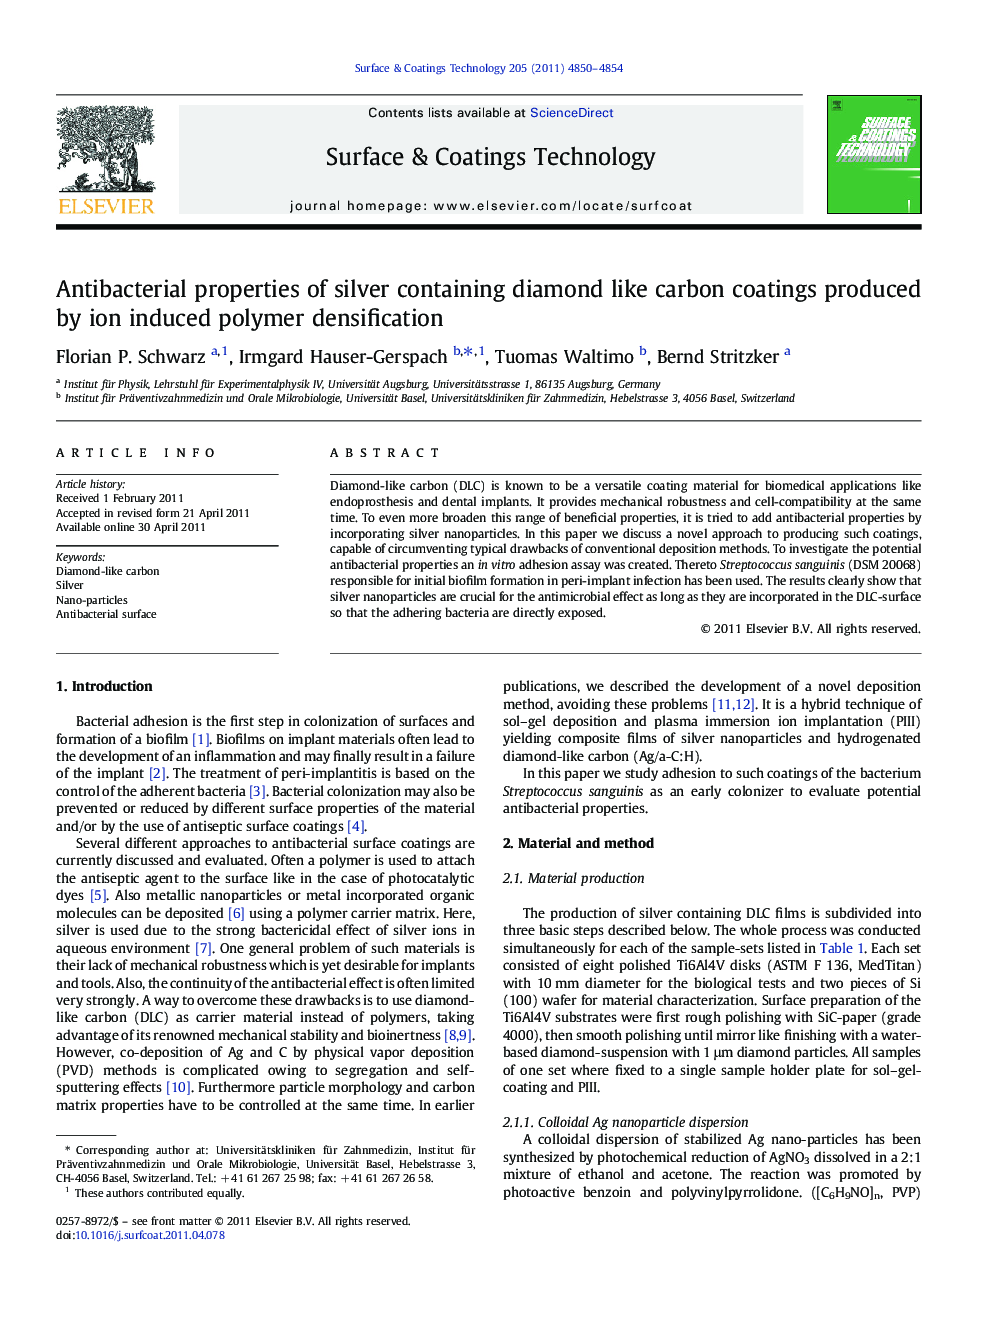 Antibacterial properties of silver containing diamond like carbon coatings produced by ion induced polymer densification